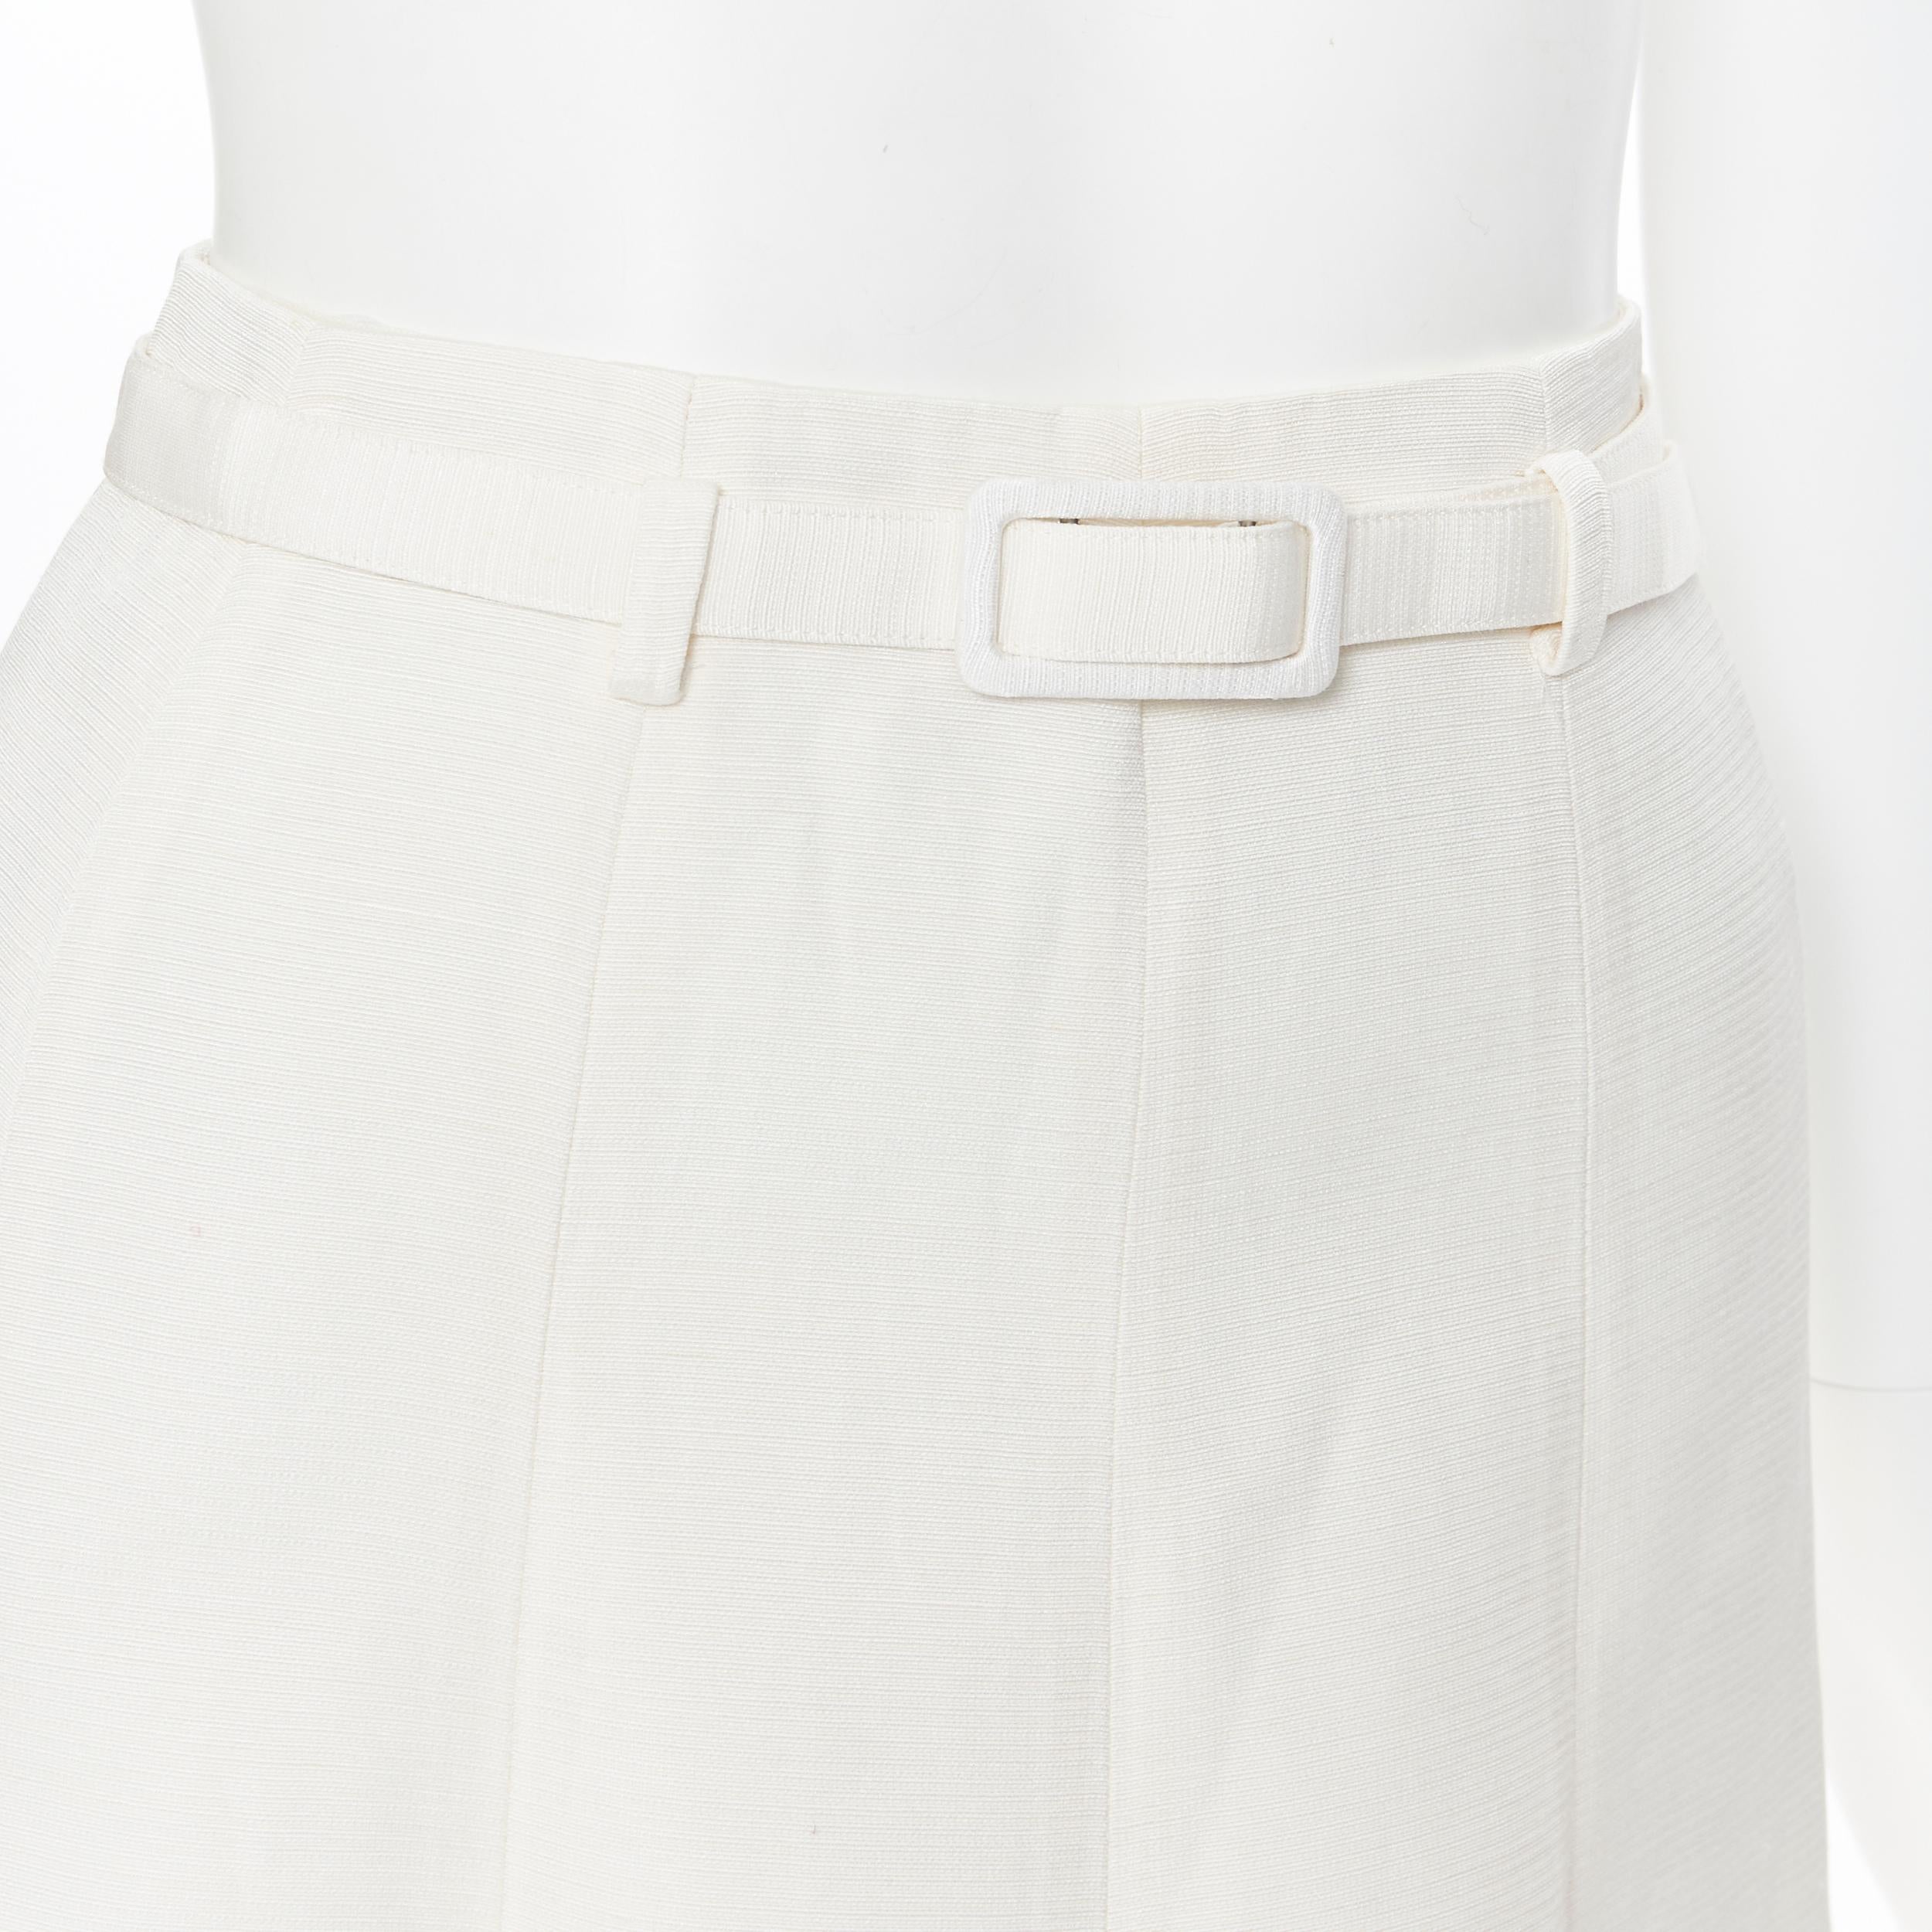 CO COLLECTION Italian  Fabric ivory white silk cotton blend belted midi skirt XS
Brand: Co Collection
Model Name / Style: Midi skirt
Material: Silk, cotton blend
Color: Beige
Pattern: Solid
Closure: Zip
Extra Detail: Detachable tonal fabric skinny